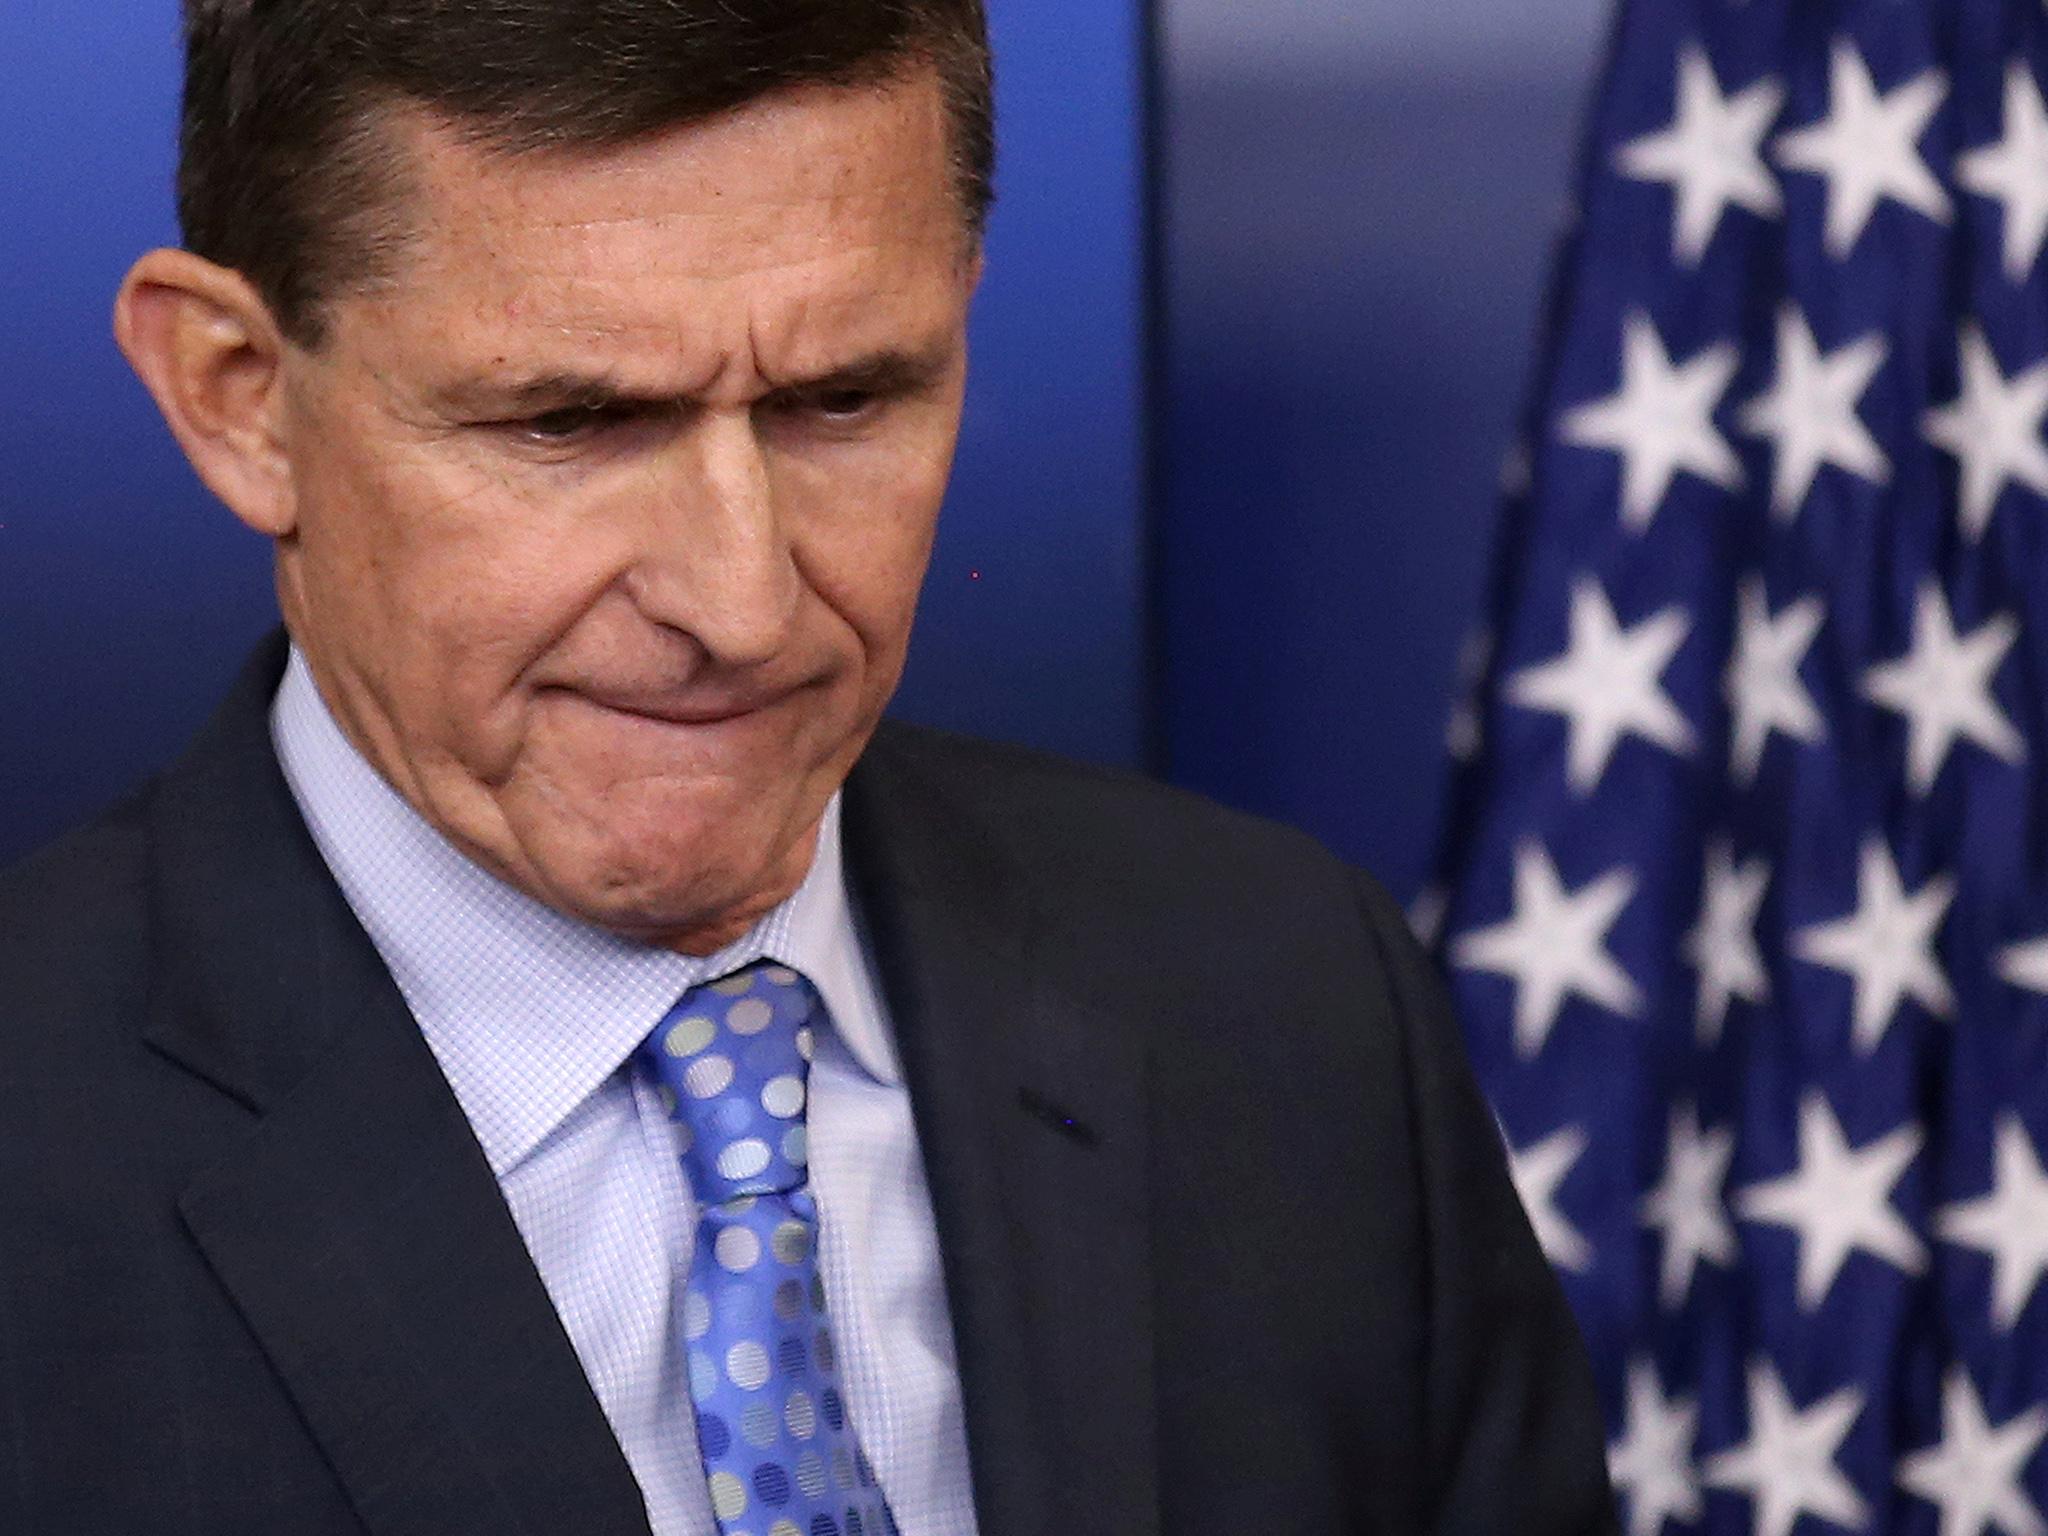 Flynn was forced out of the White House 24 days after Inauguration